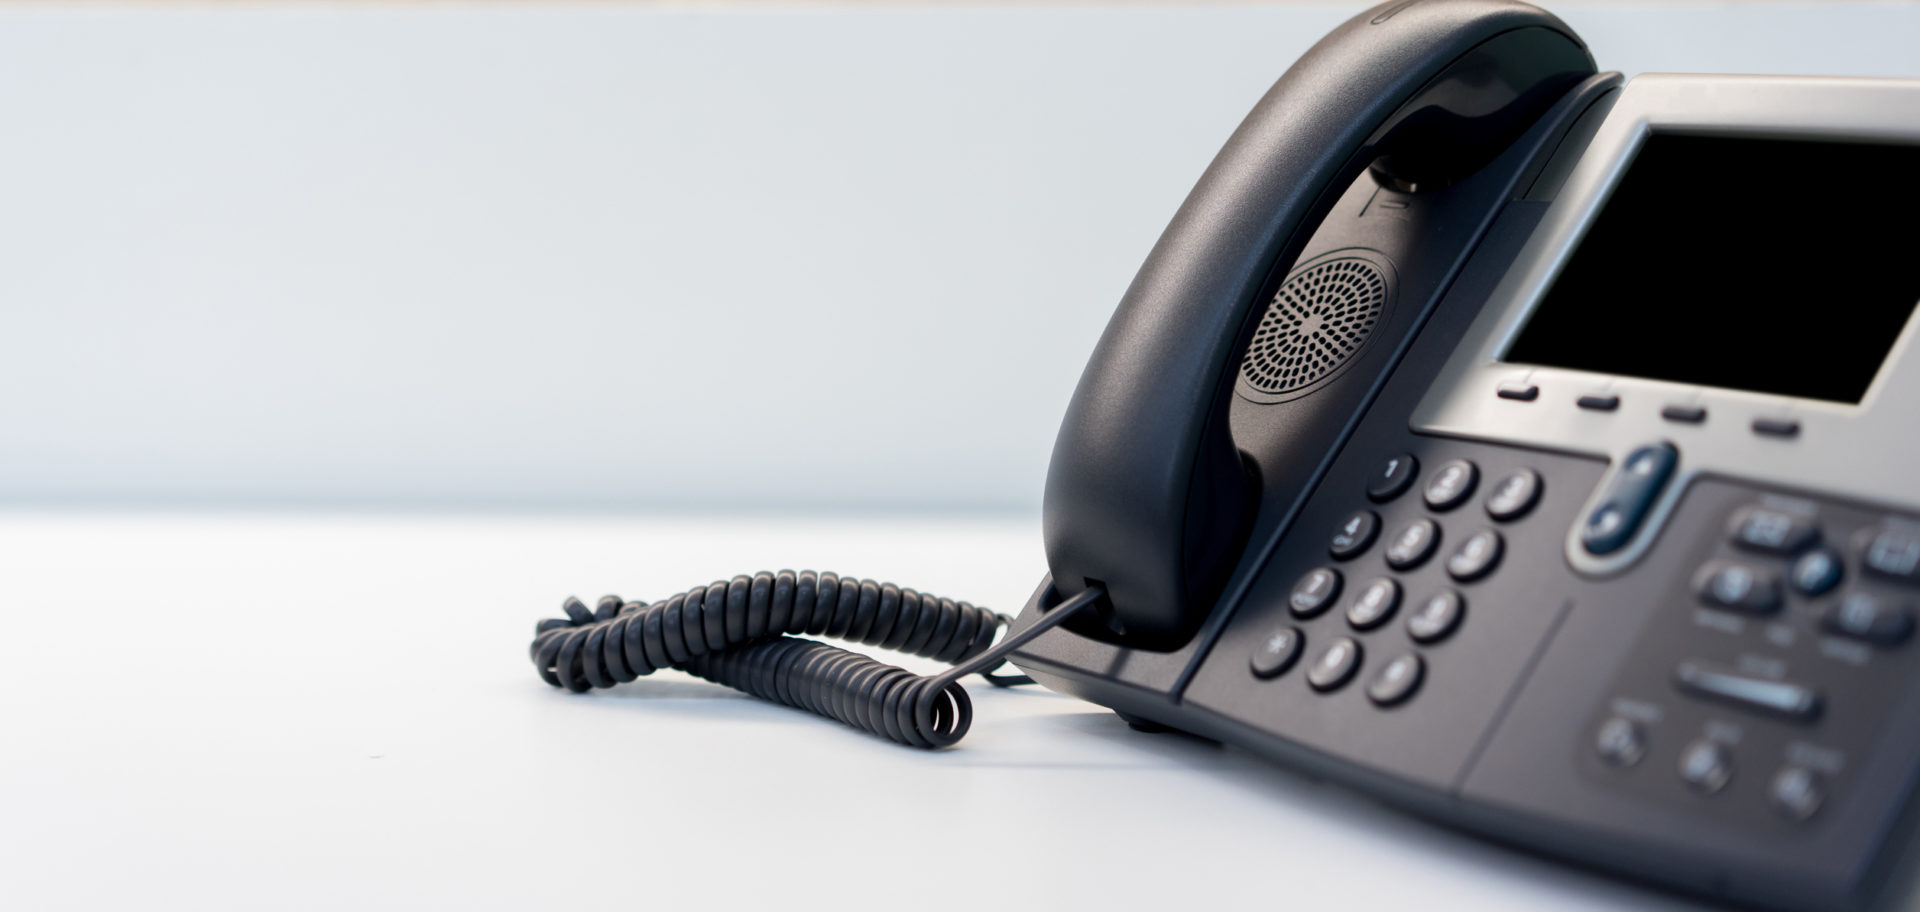 What Are the Benefits of a Star2Star VoIP Business Phone?